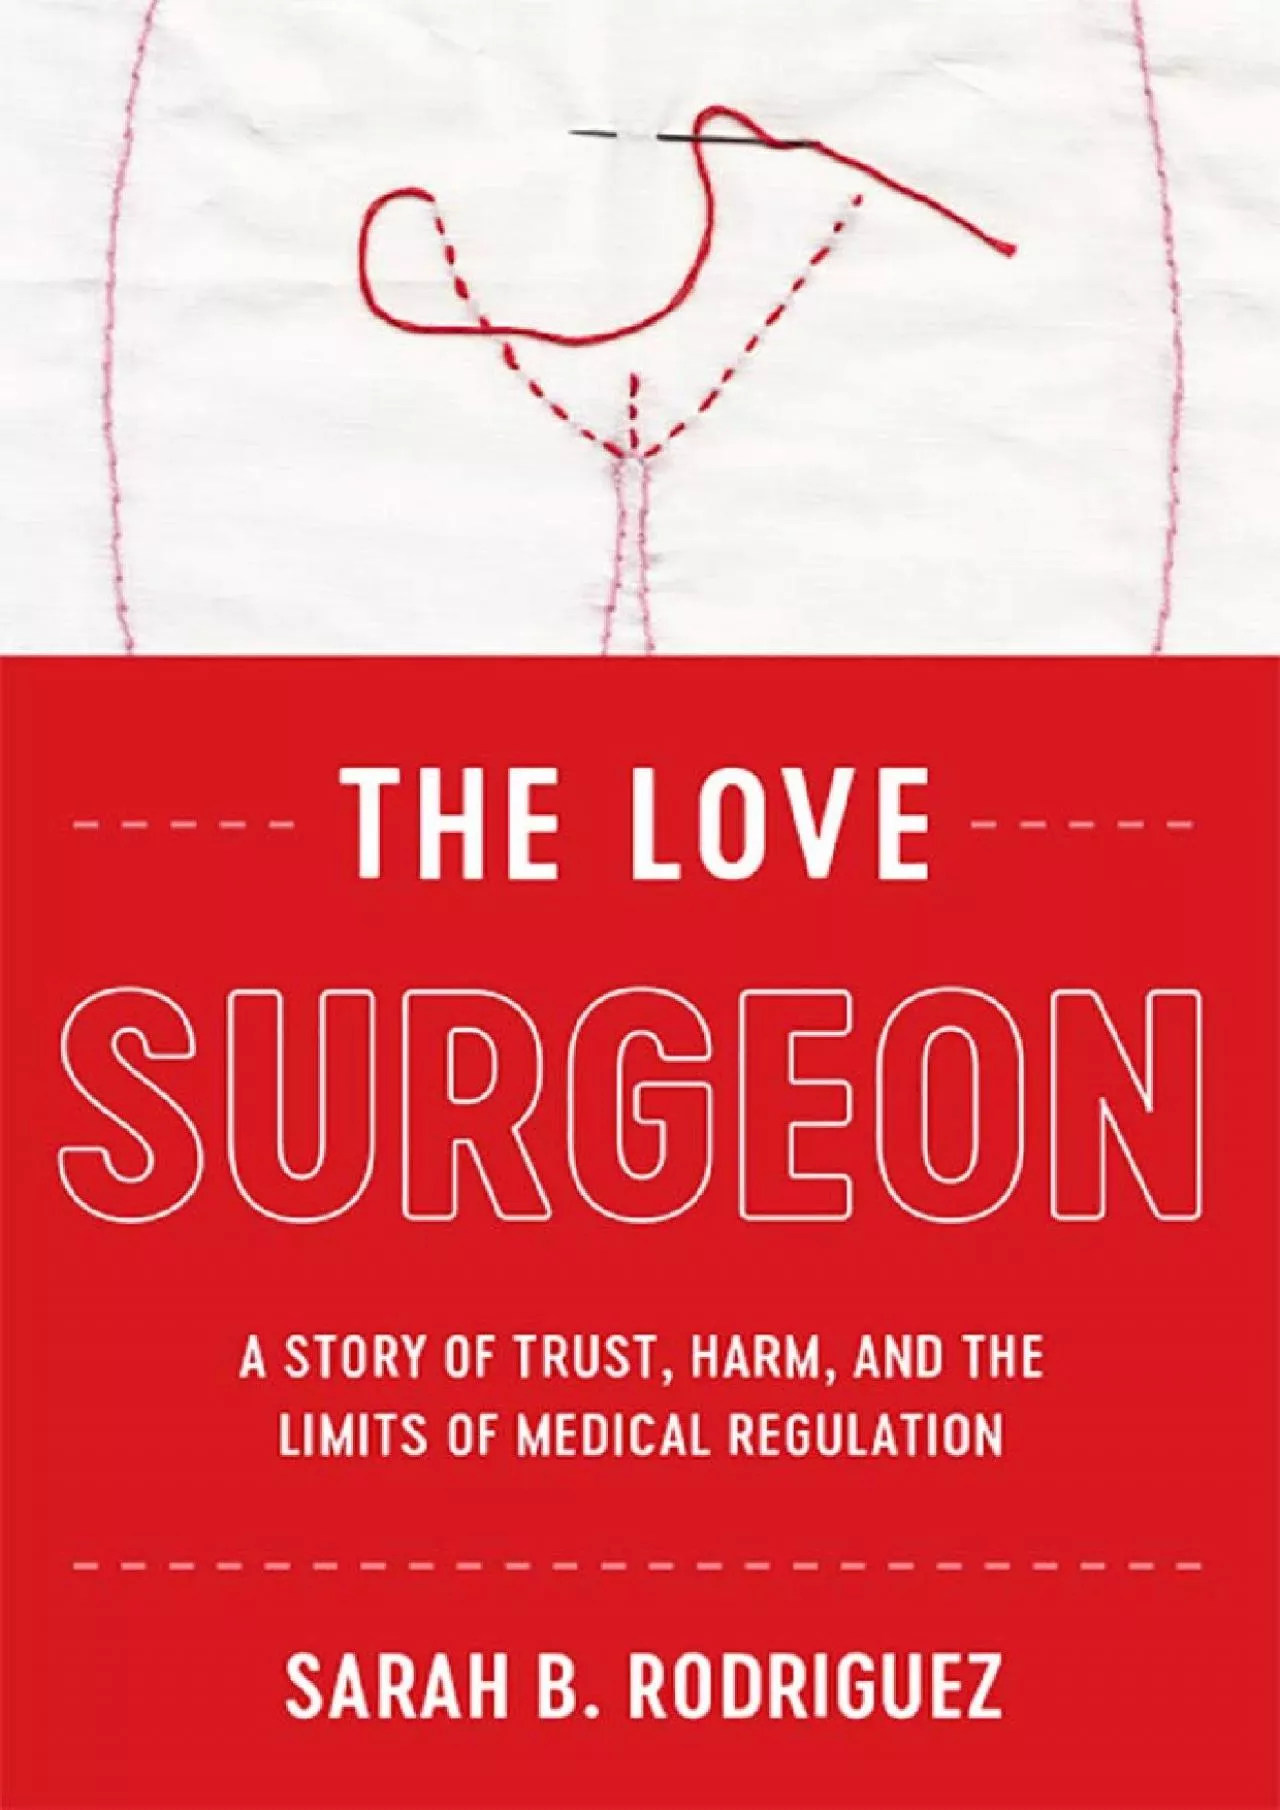 (BOOS)-The Love Surgeon: A Story of Trust, Harm, and the Limits of Medical Regulation